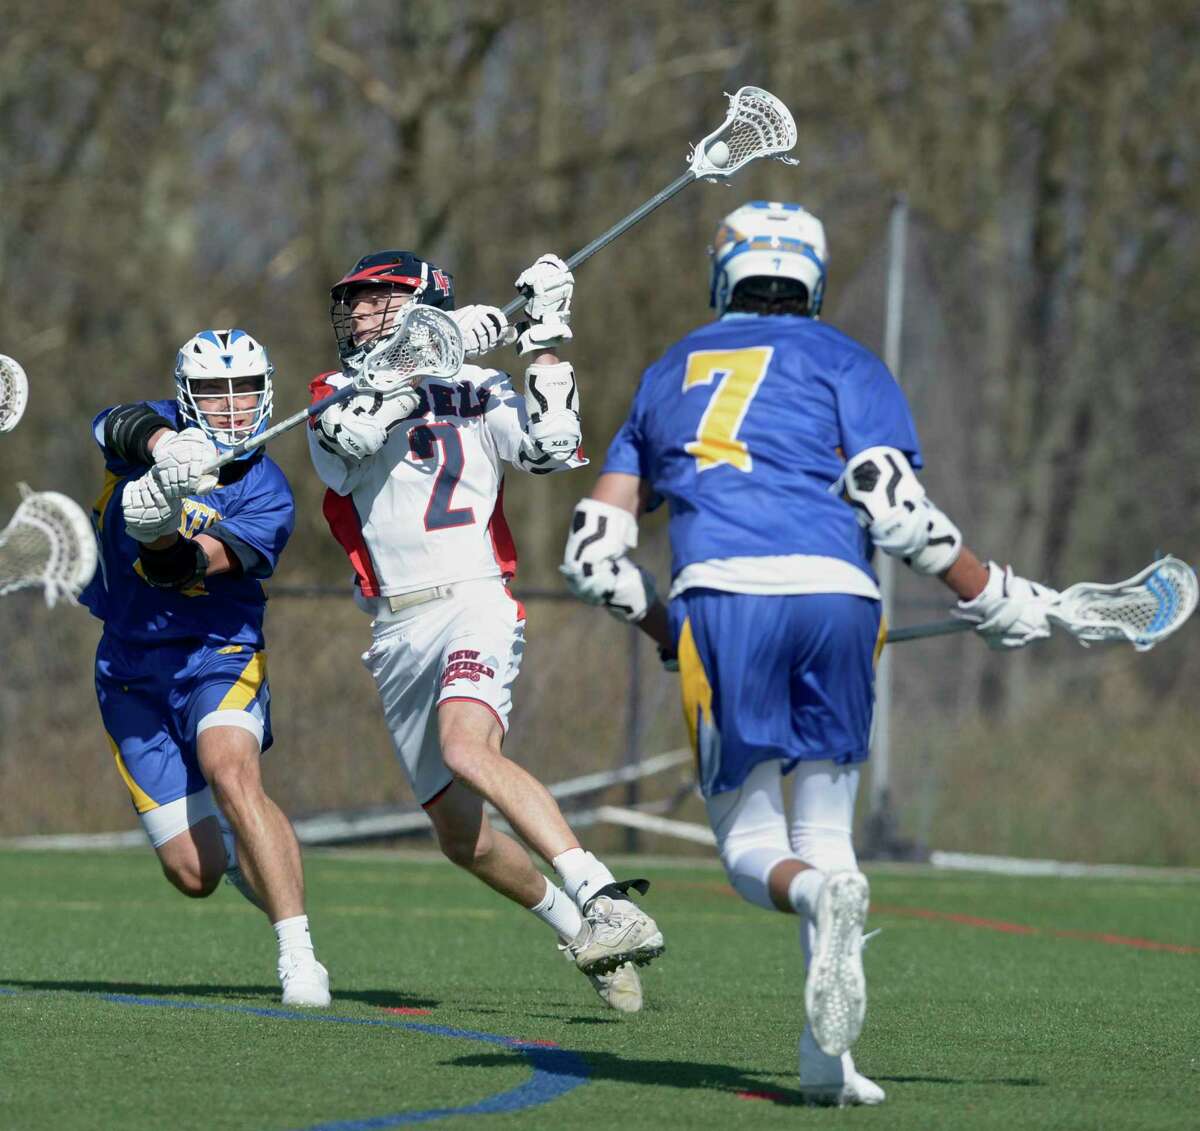 New Fairfield's Nathan Alviti (2) shoots while being defended by Brookfield's Ryan Sanborn (19) in the boys lacrosse game between Brookfield and New Fairfield high schools. Tuesday, April 13, 2021, at New Fairfield High School, New Fairfield, Conn.